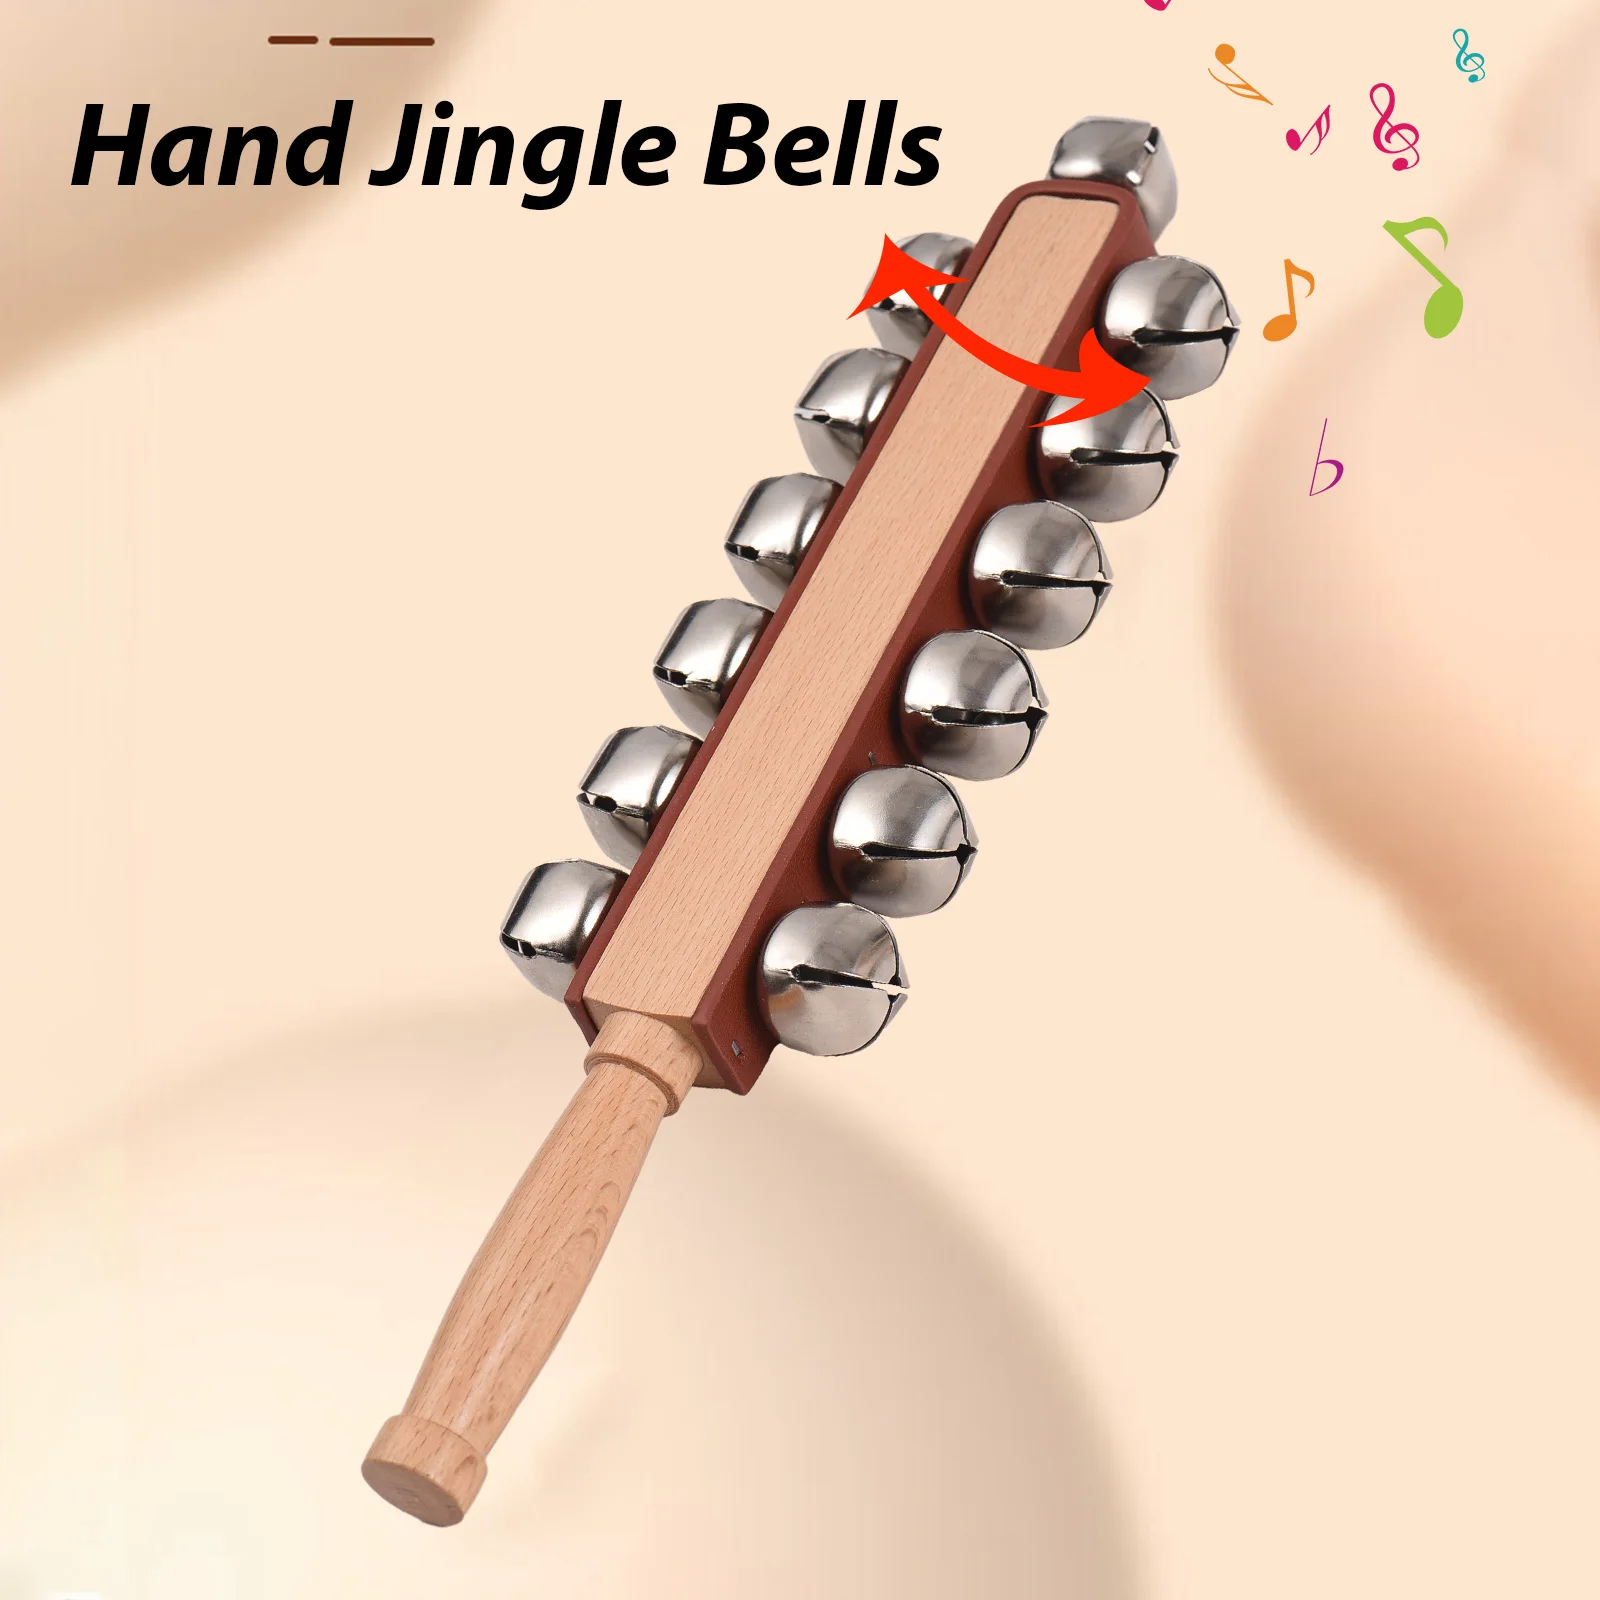 Hand Jingle Bells Hand Sleigh Bells Wooden Shaker Jingle Bells Stick Musical Percussion Instrument Bells for Xmas Party Favors